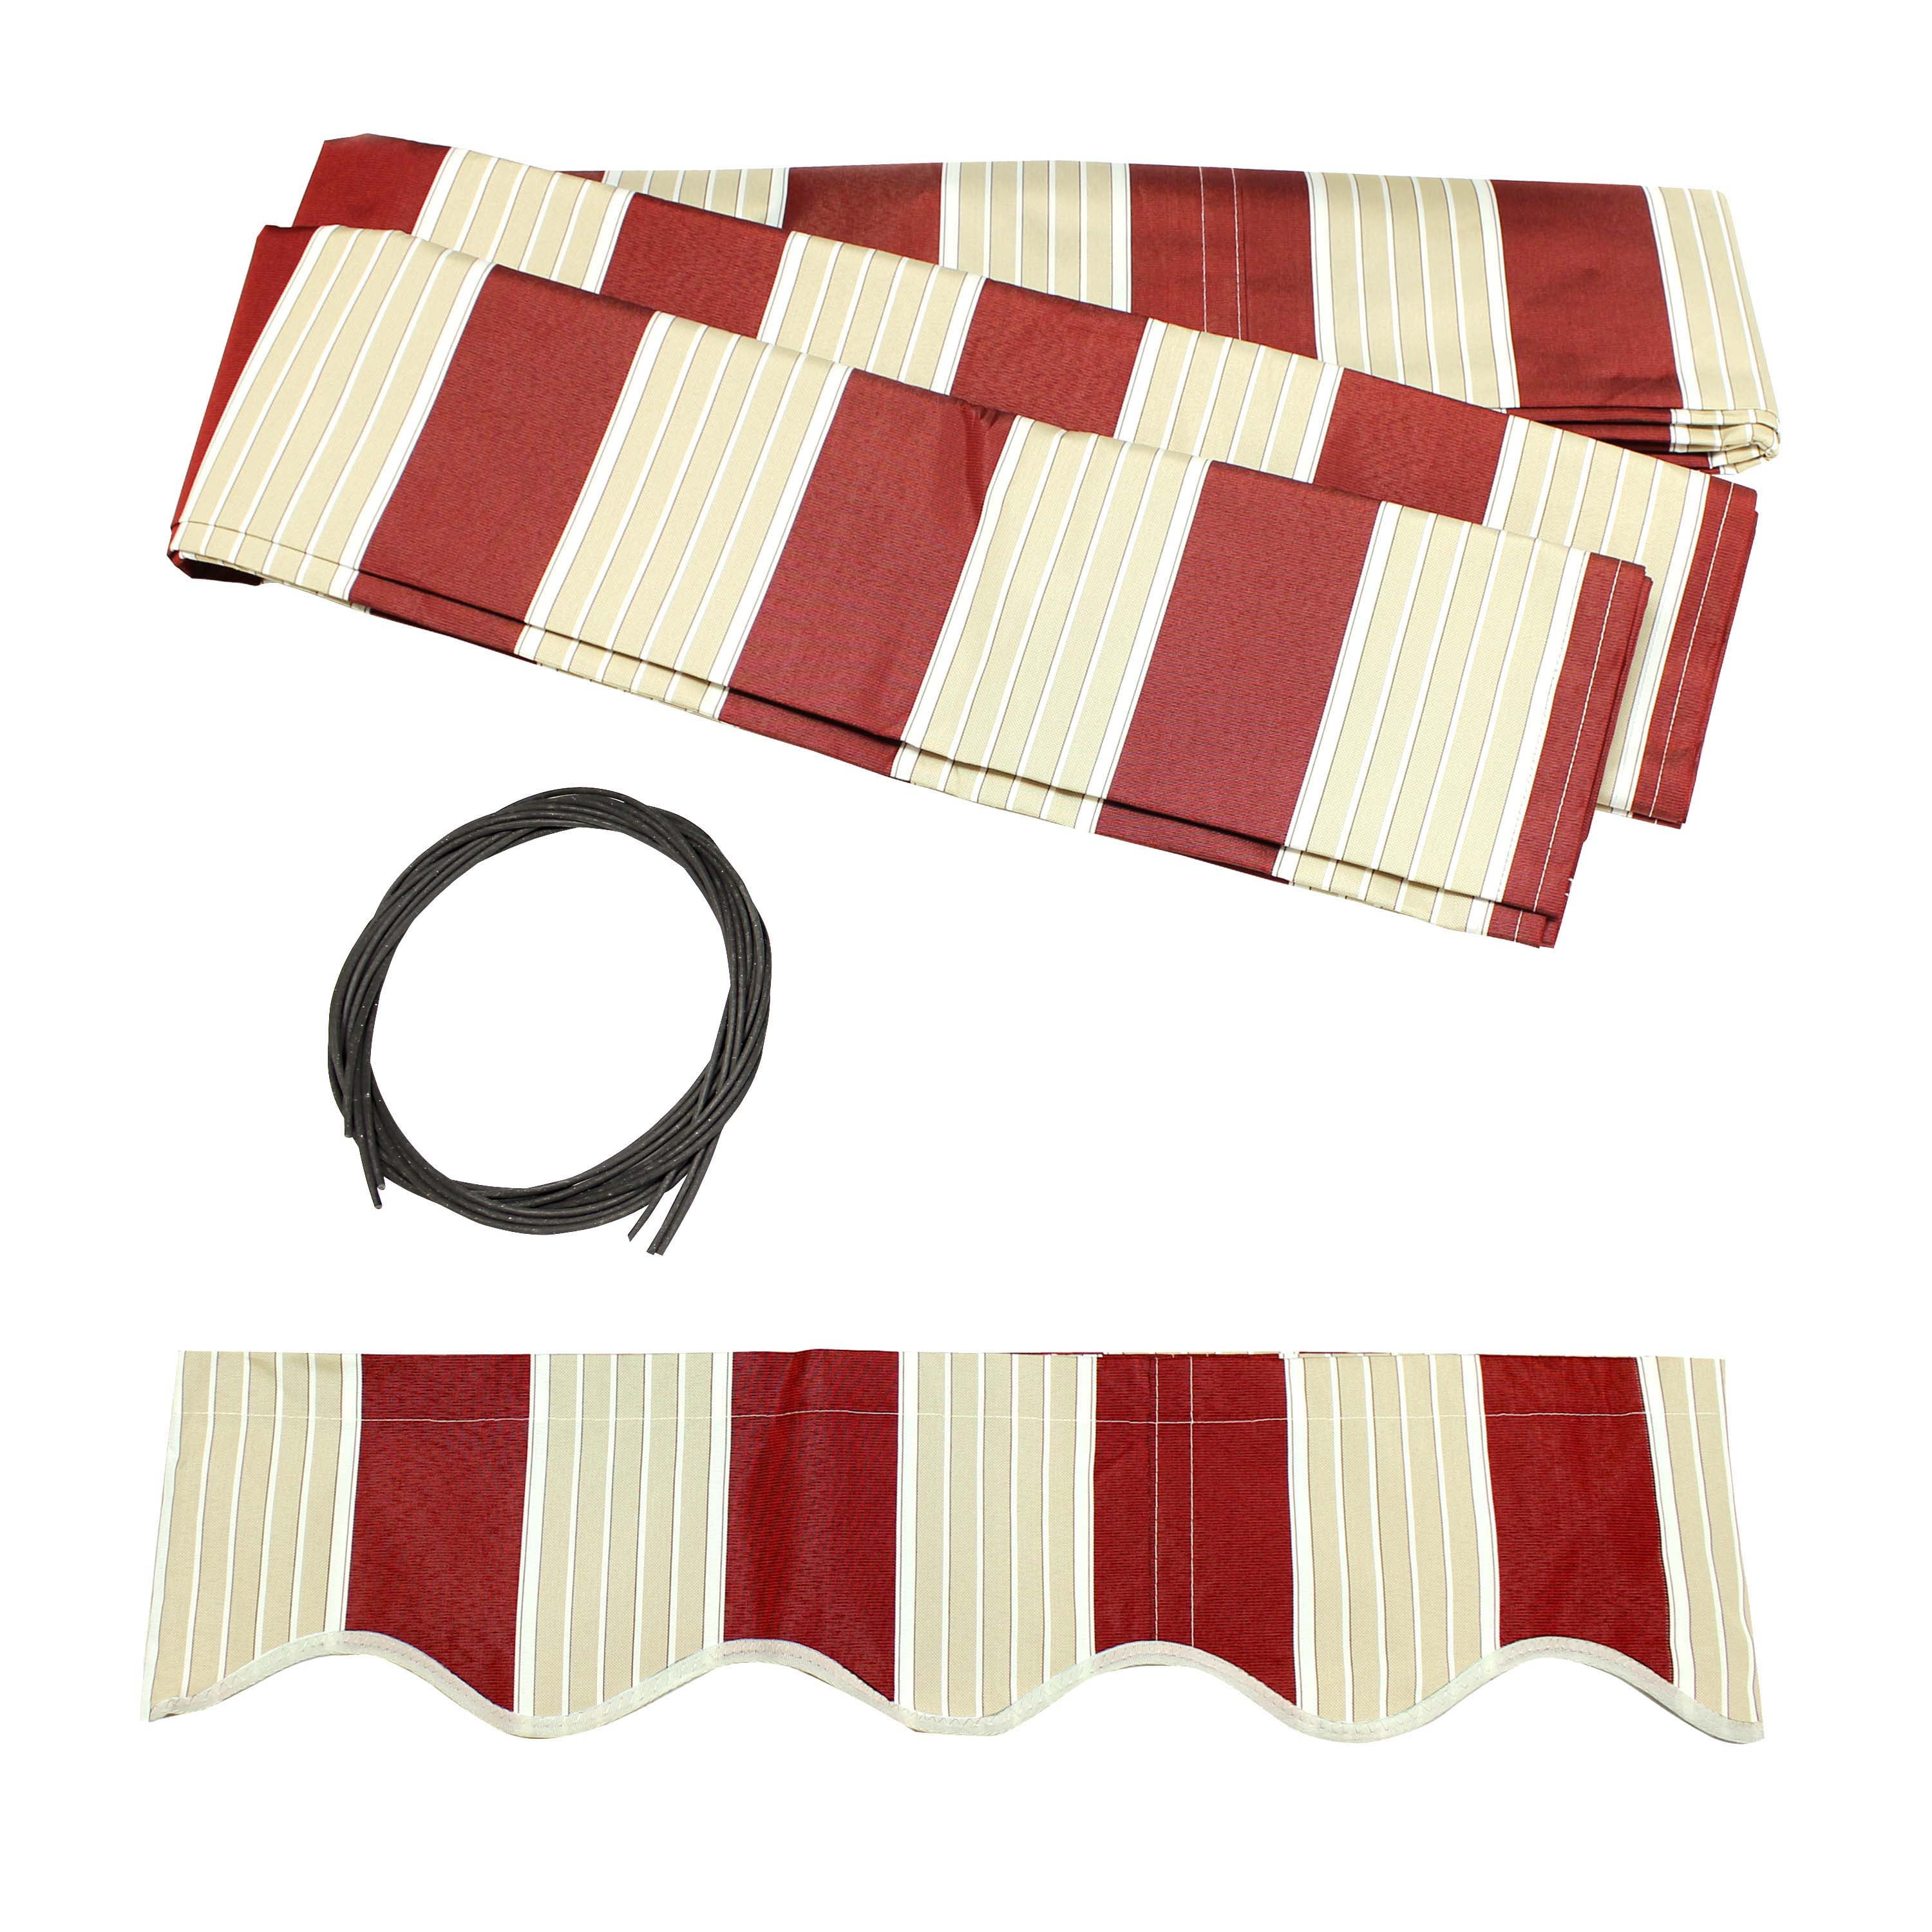 Picture of ALEKO Awning Fabric Replacement for Retractable 8 x 6.5 Ft Awning Multi Red